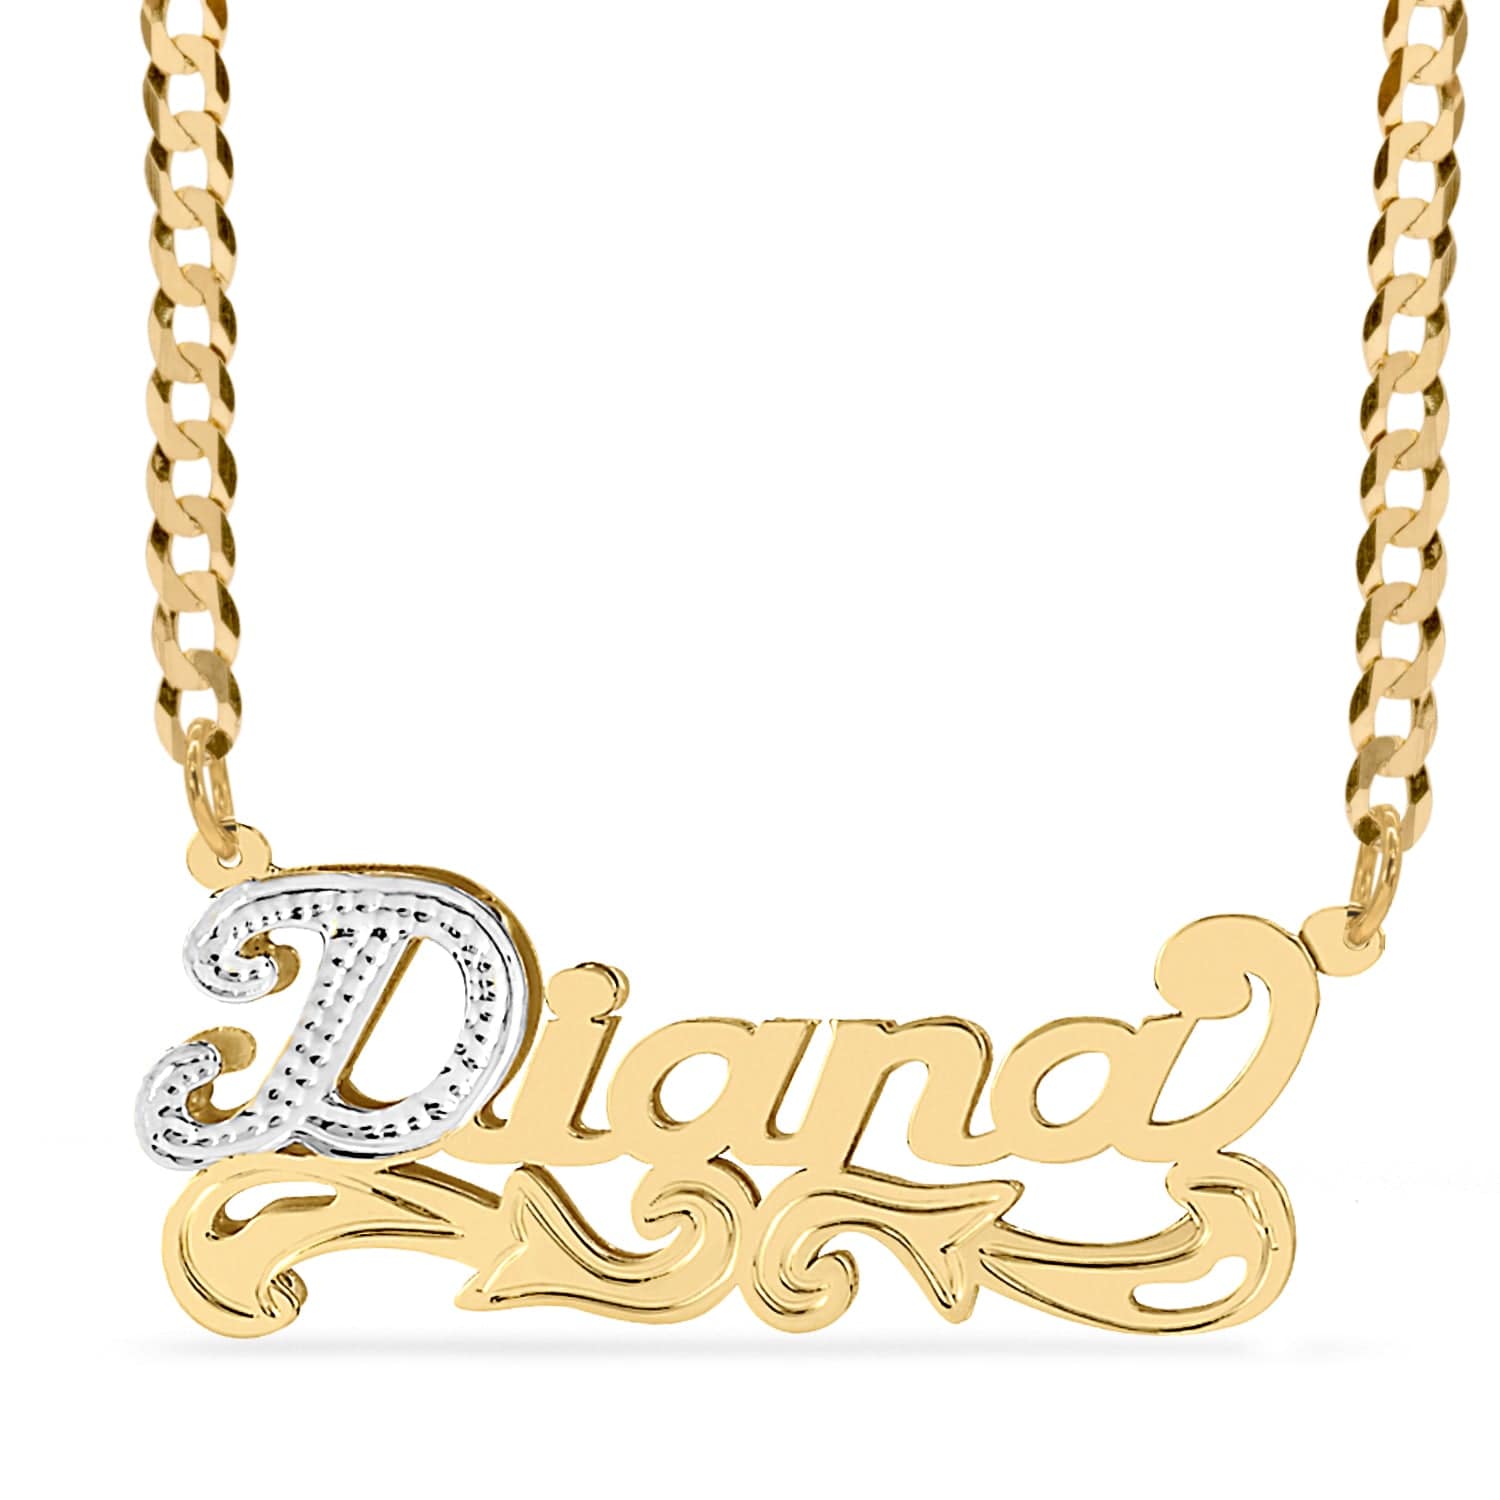 Two-Tone Sterling Silver / Cuban Chain Double Plated Nameplate Necklace "Diana"